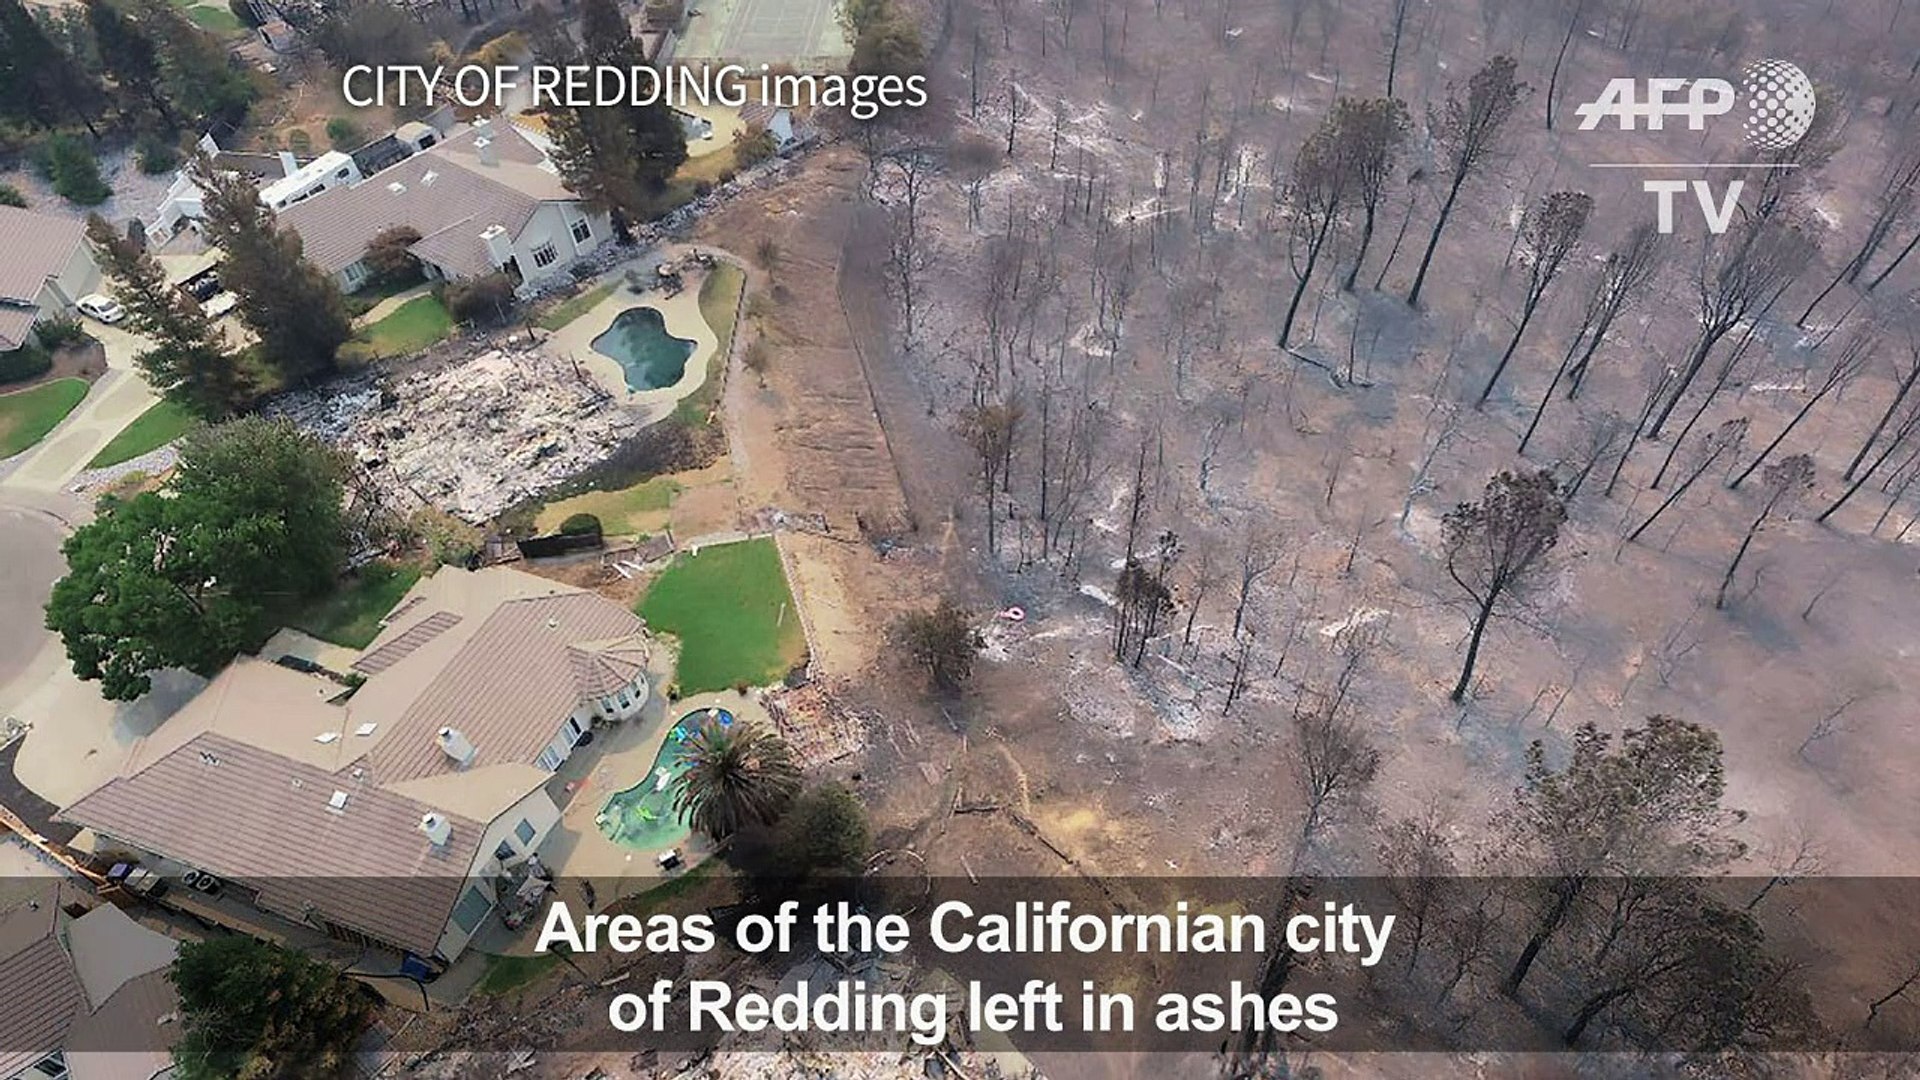 Bird's eye view of the scorched city of Redding, California - Vidéo  Dailymotion